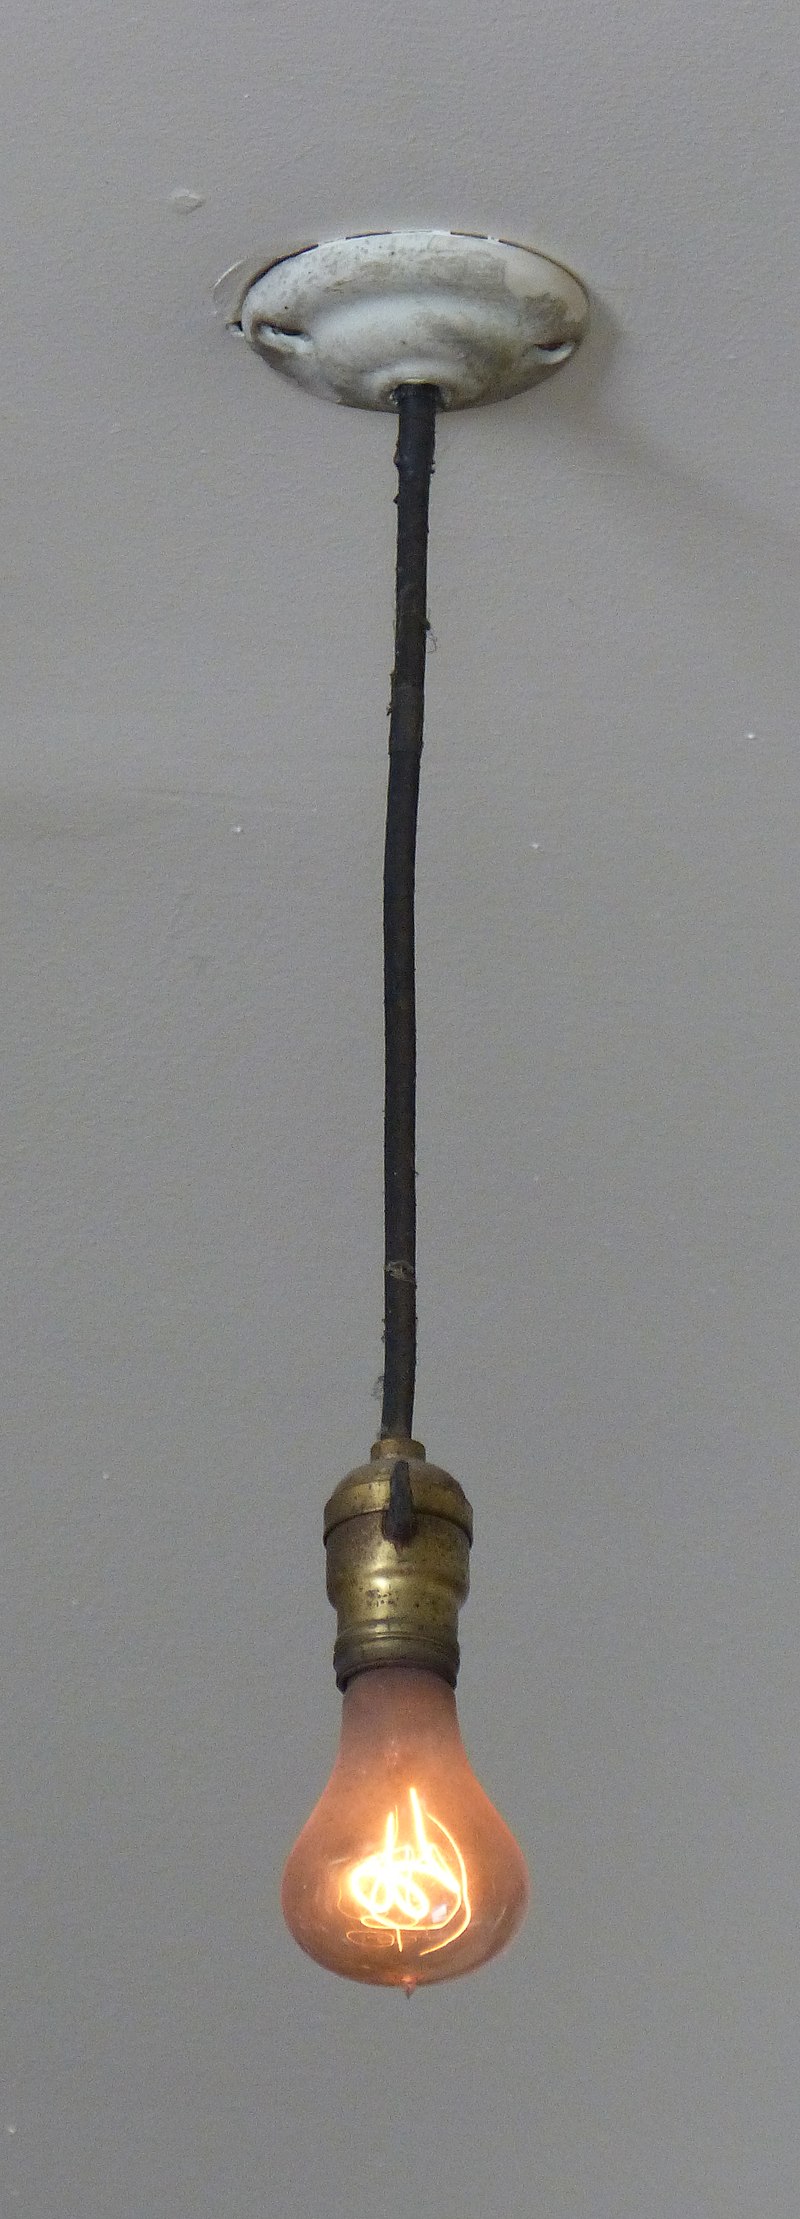 A photo of the pendant light at Fire Station #6 in which the bulb is installed.